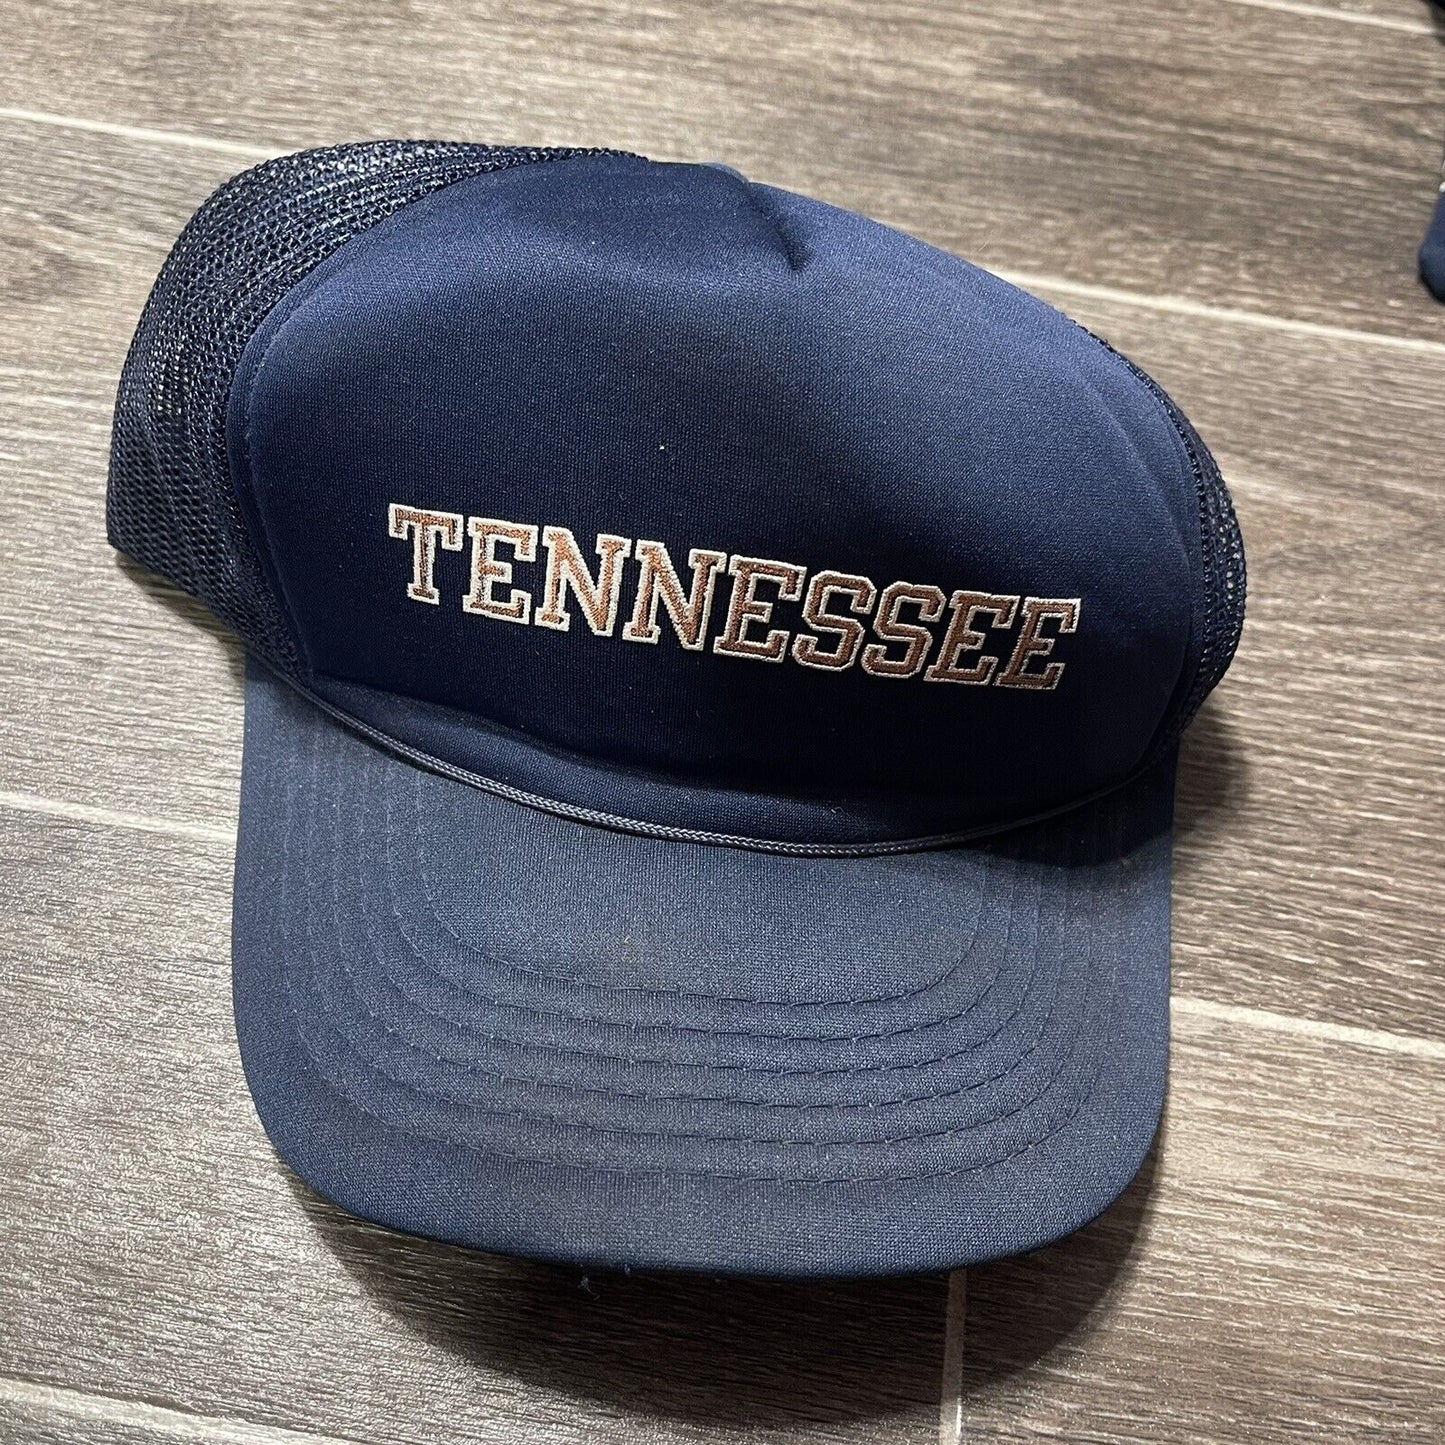 Vintage State of TENNESSEE mesh truckers hat